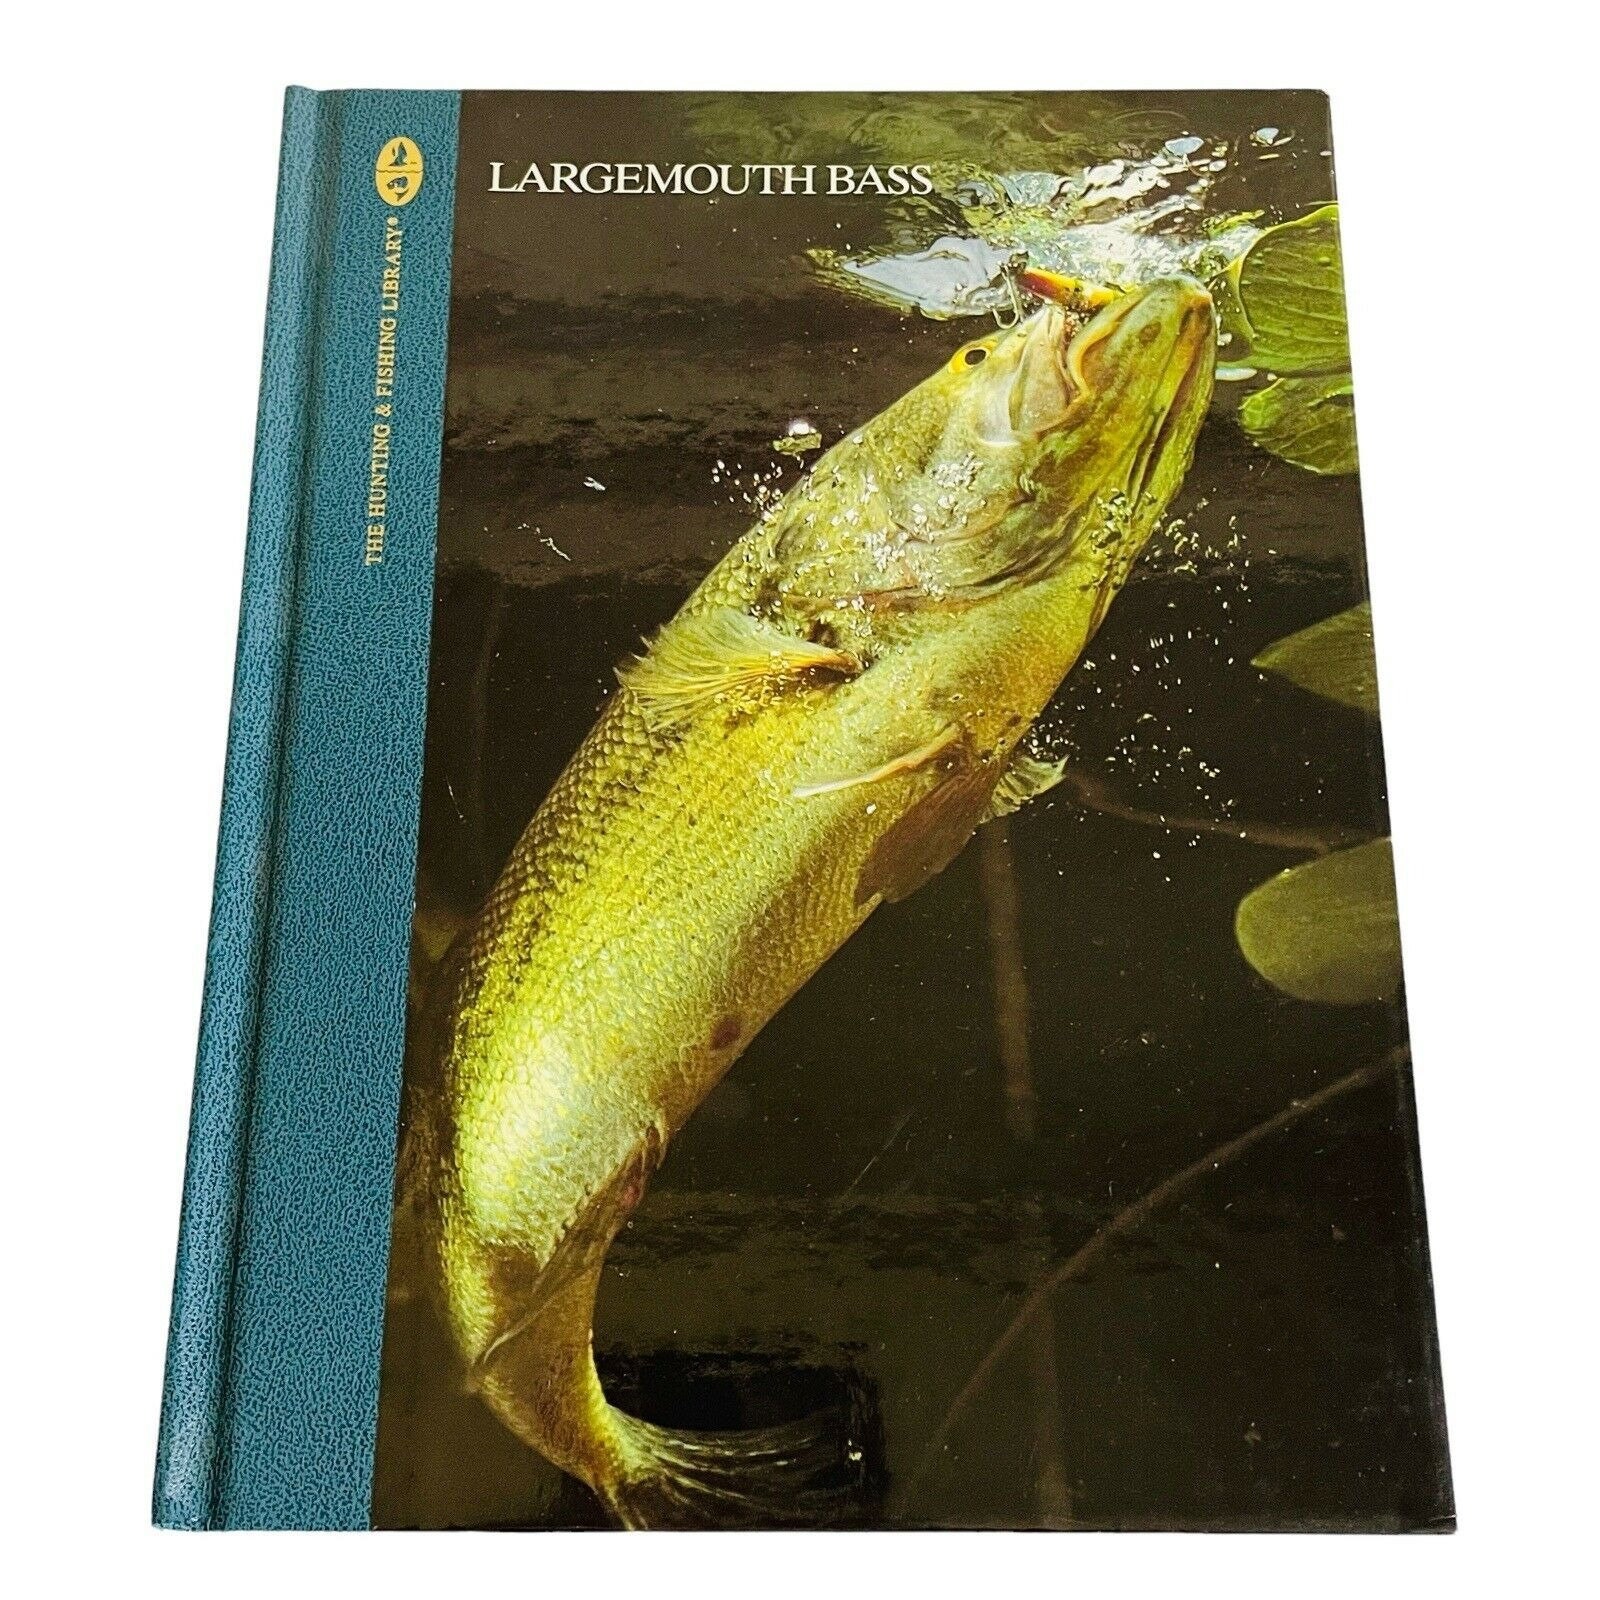 Rare Don Oster Largemouth Bass Vintage Book Fish Hunting Fishing Library  Reference Fisherman Guideline Handbook Guide Manual Education -  Canada